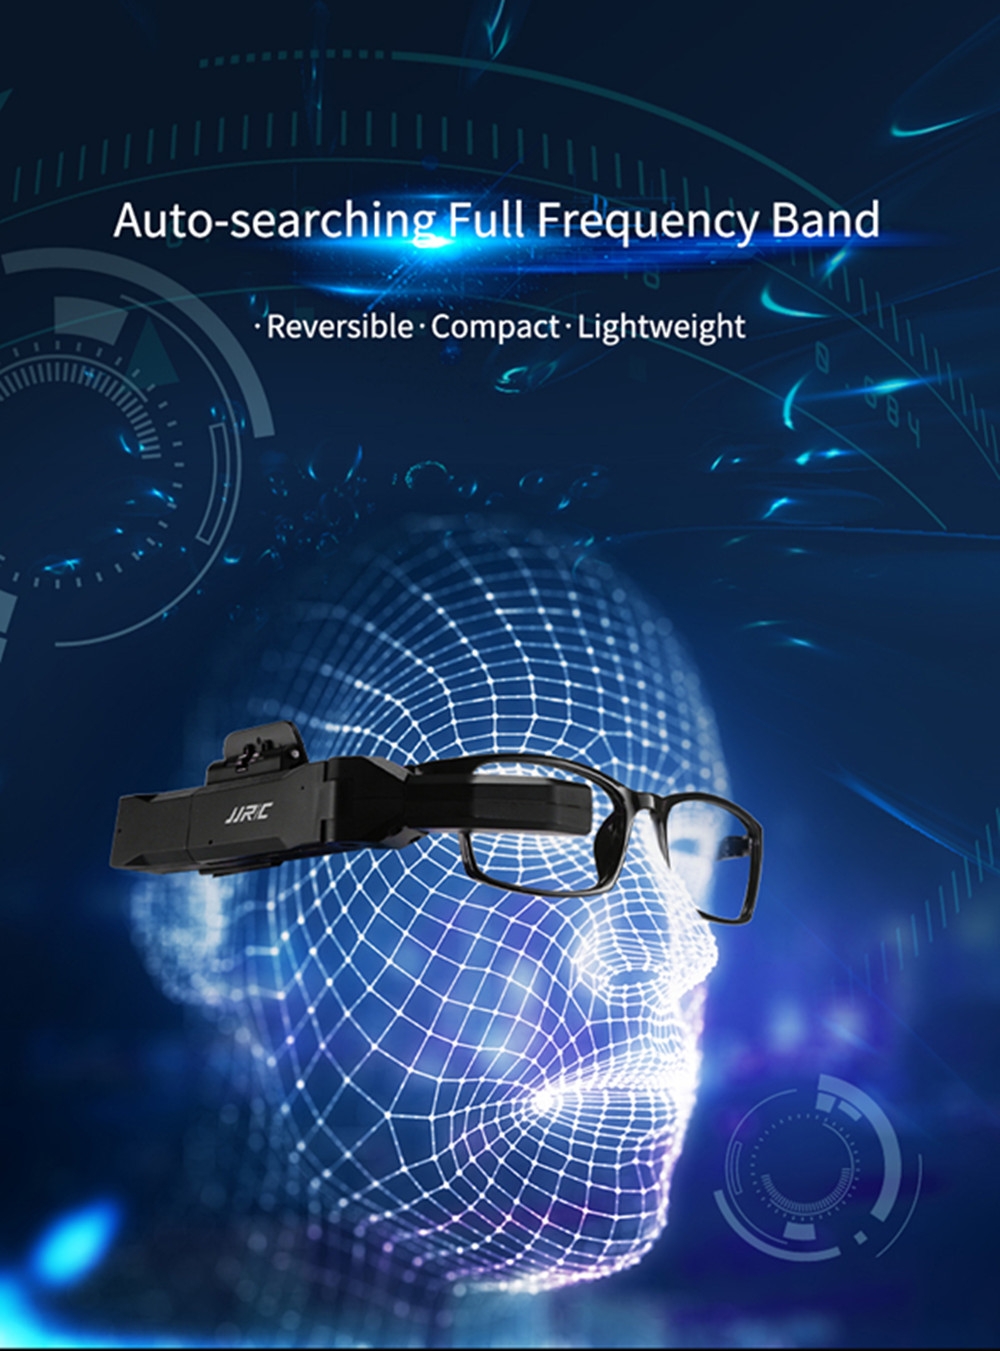 JJRC FPV-003 5.8GHz 40CH Full Frequency Band Auto-searching FPV Goggles Monocular Glasses w/ Battery